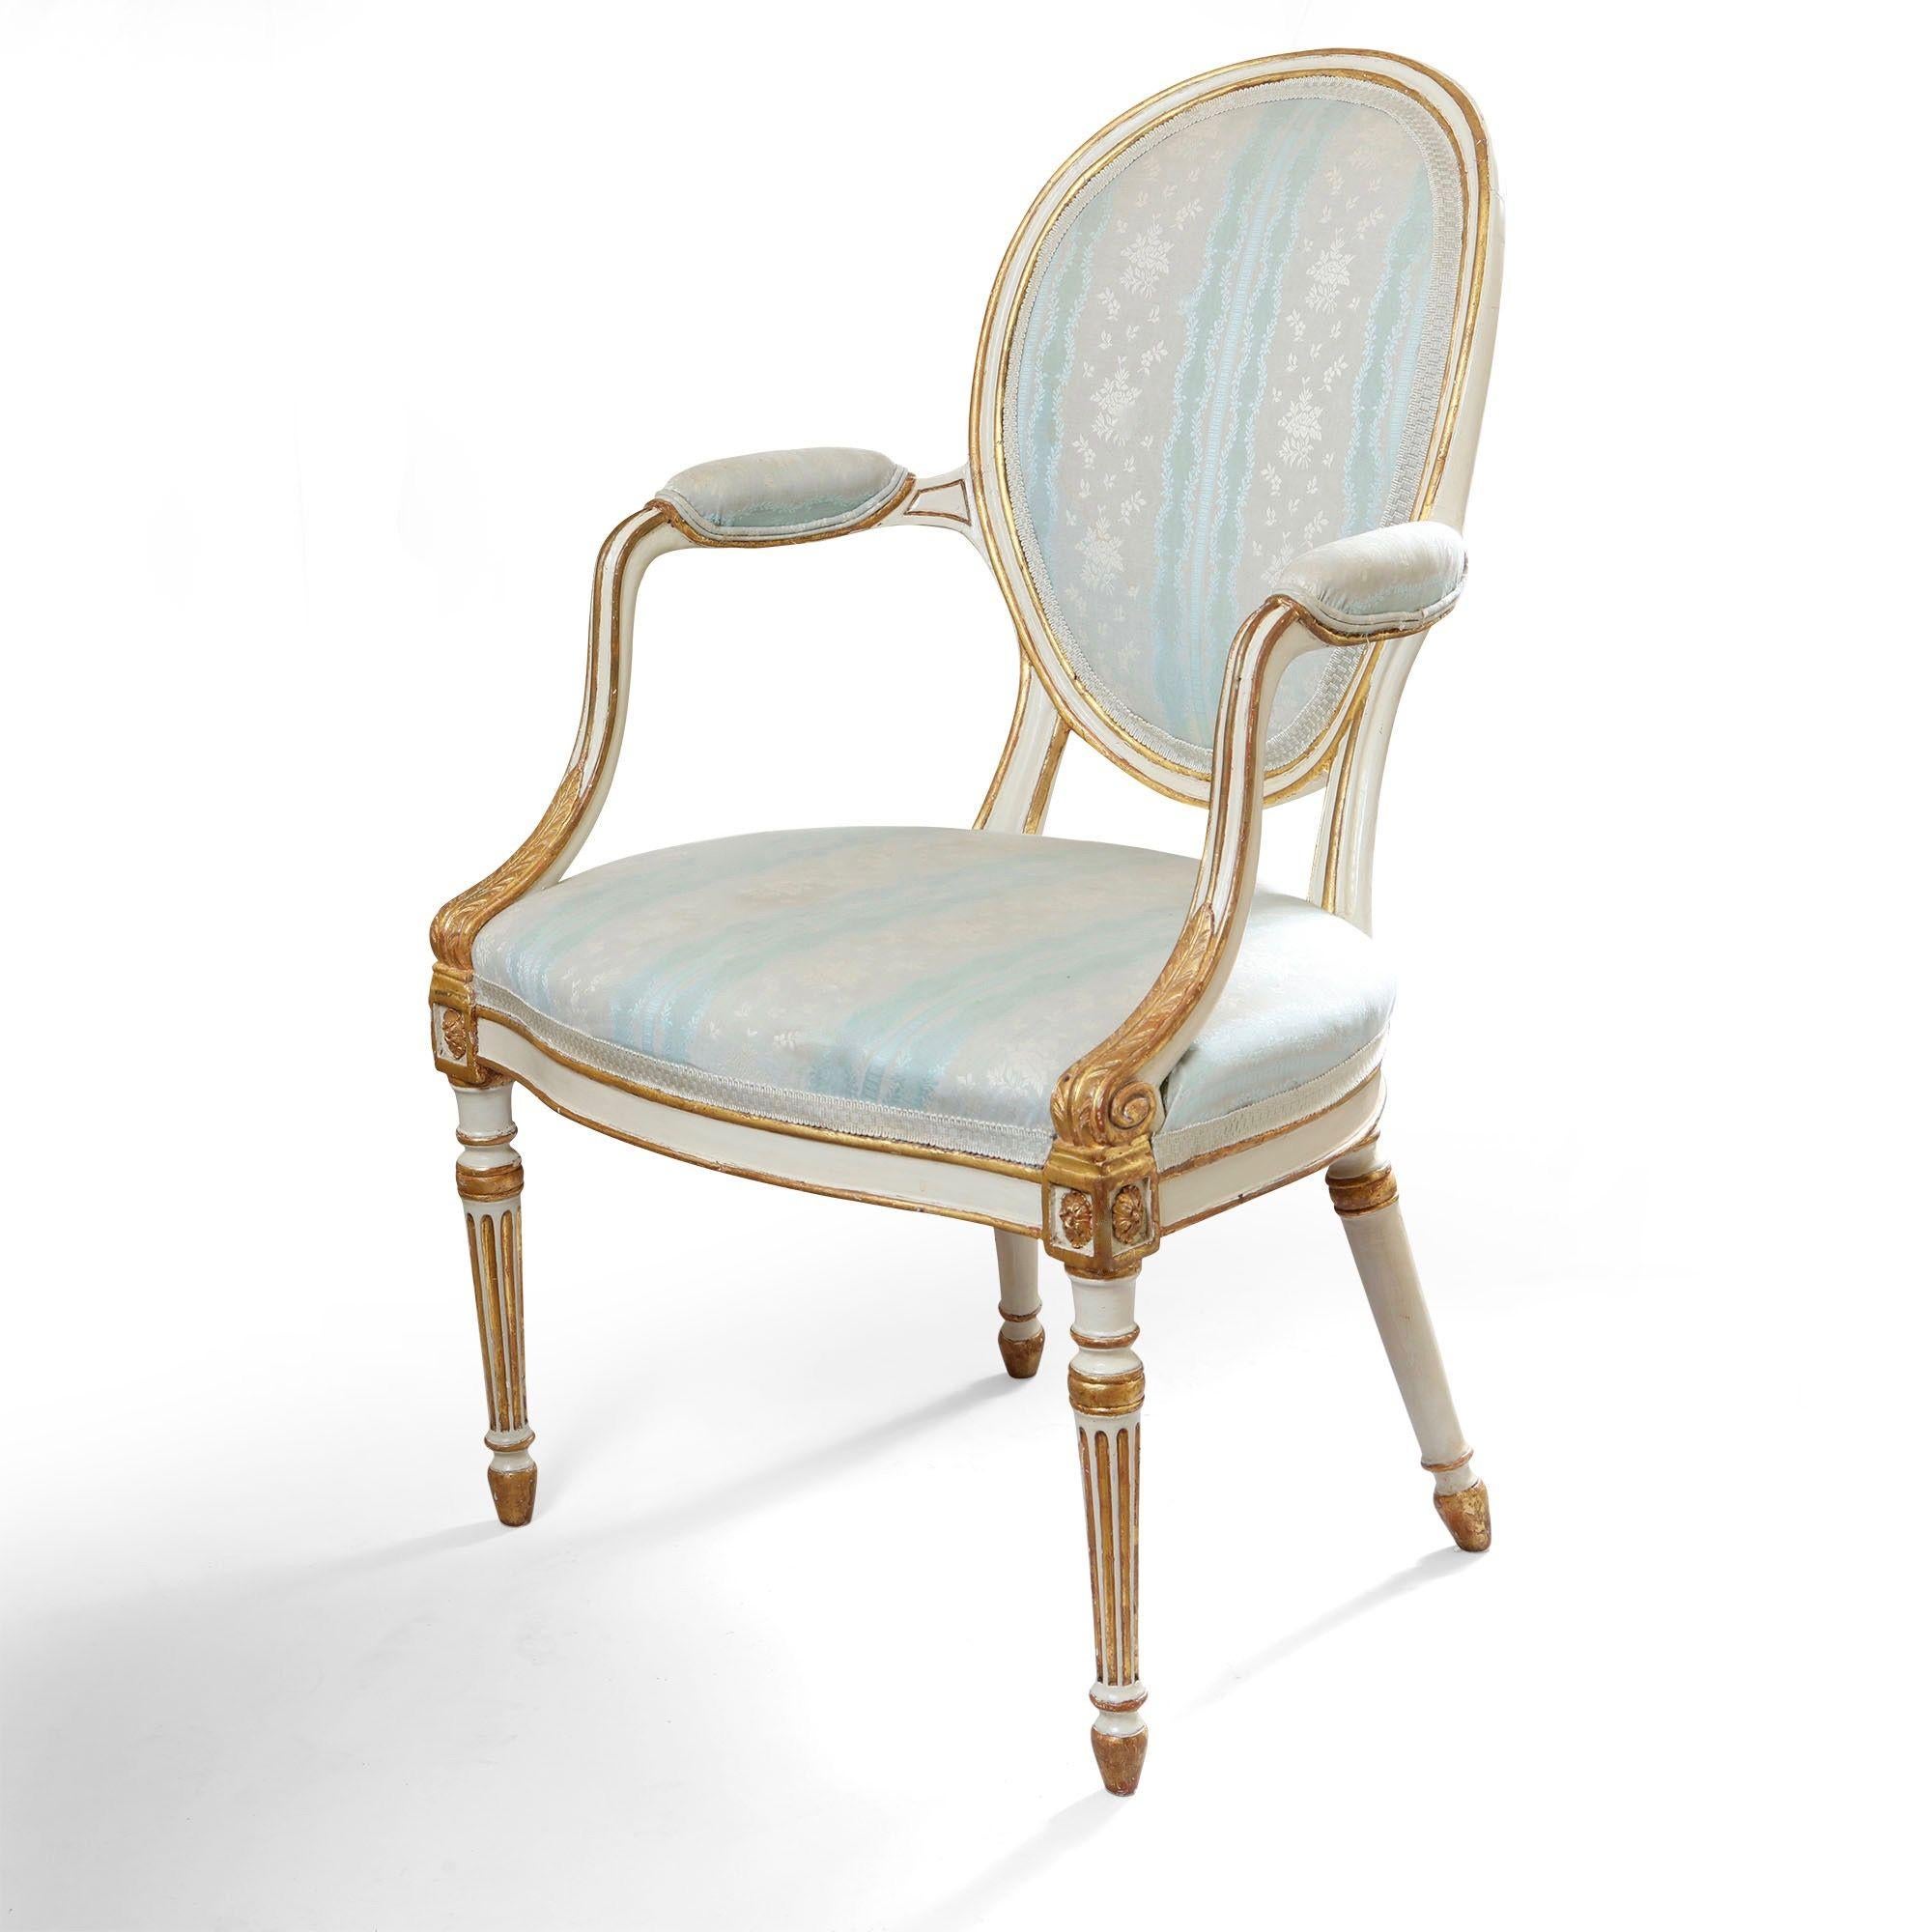 Adam Style George III Parcel Gilt Painted Pair of Chairs